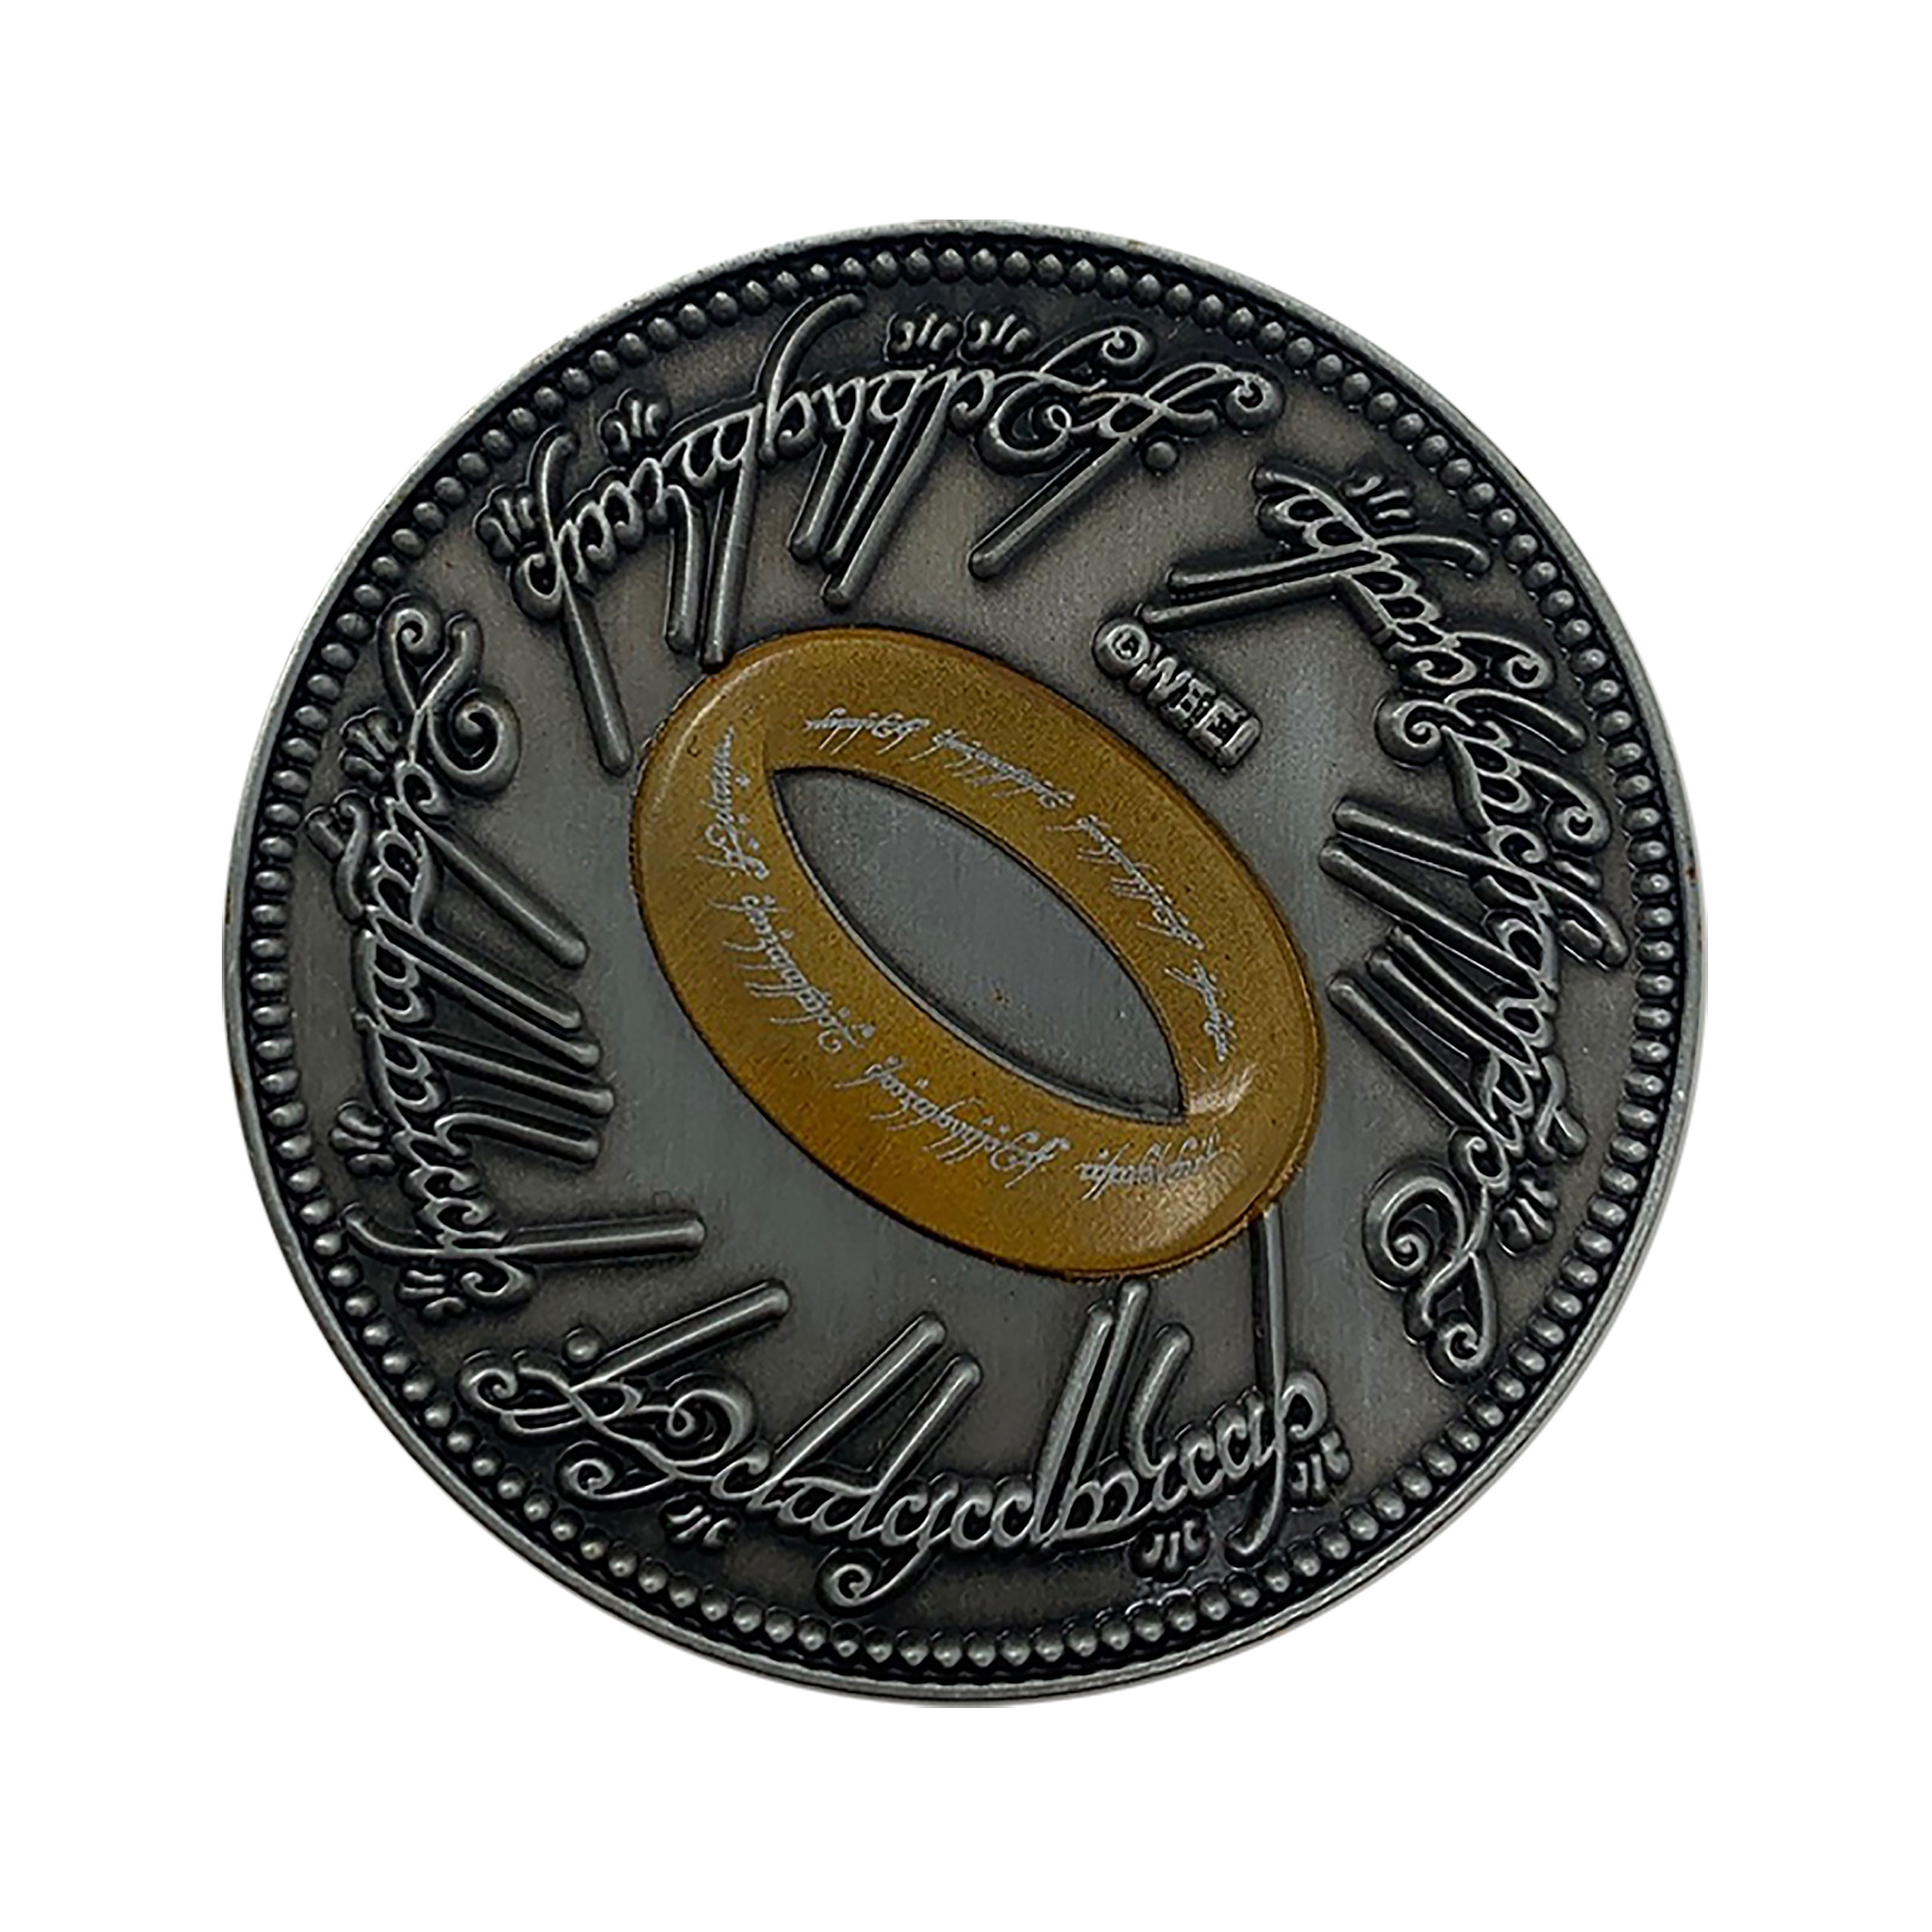 Lord of the Rings - Gollum Collector's Coin